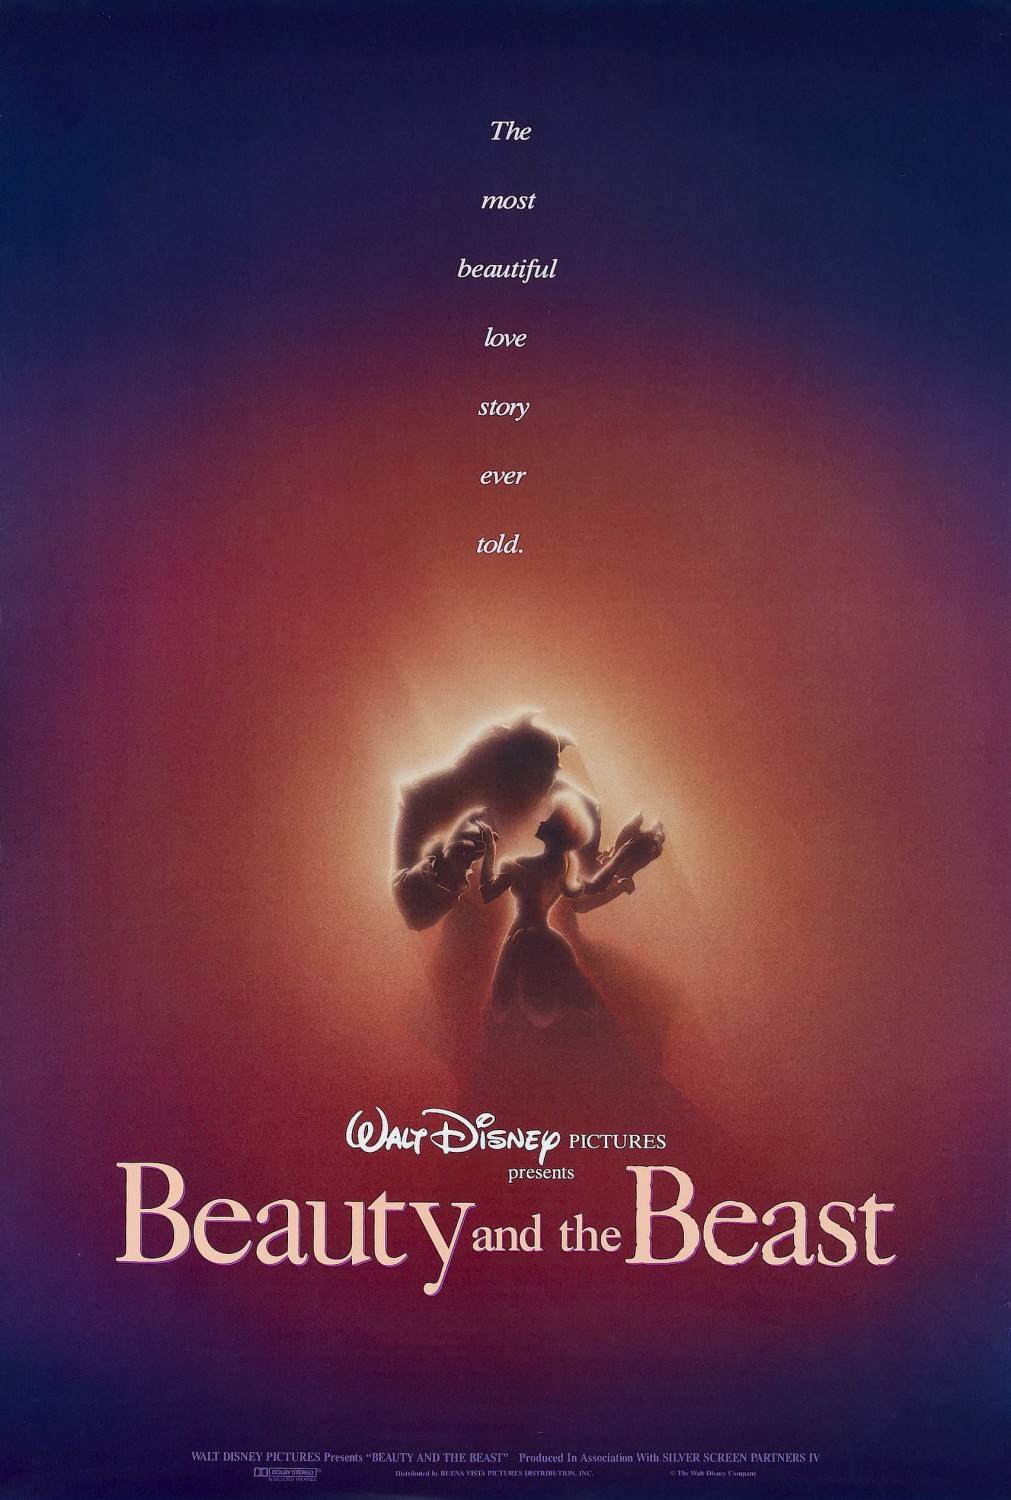 A movie poster featuring the silhouette of Beauty and her Beast